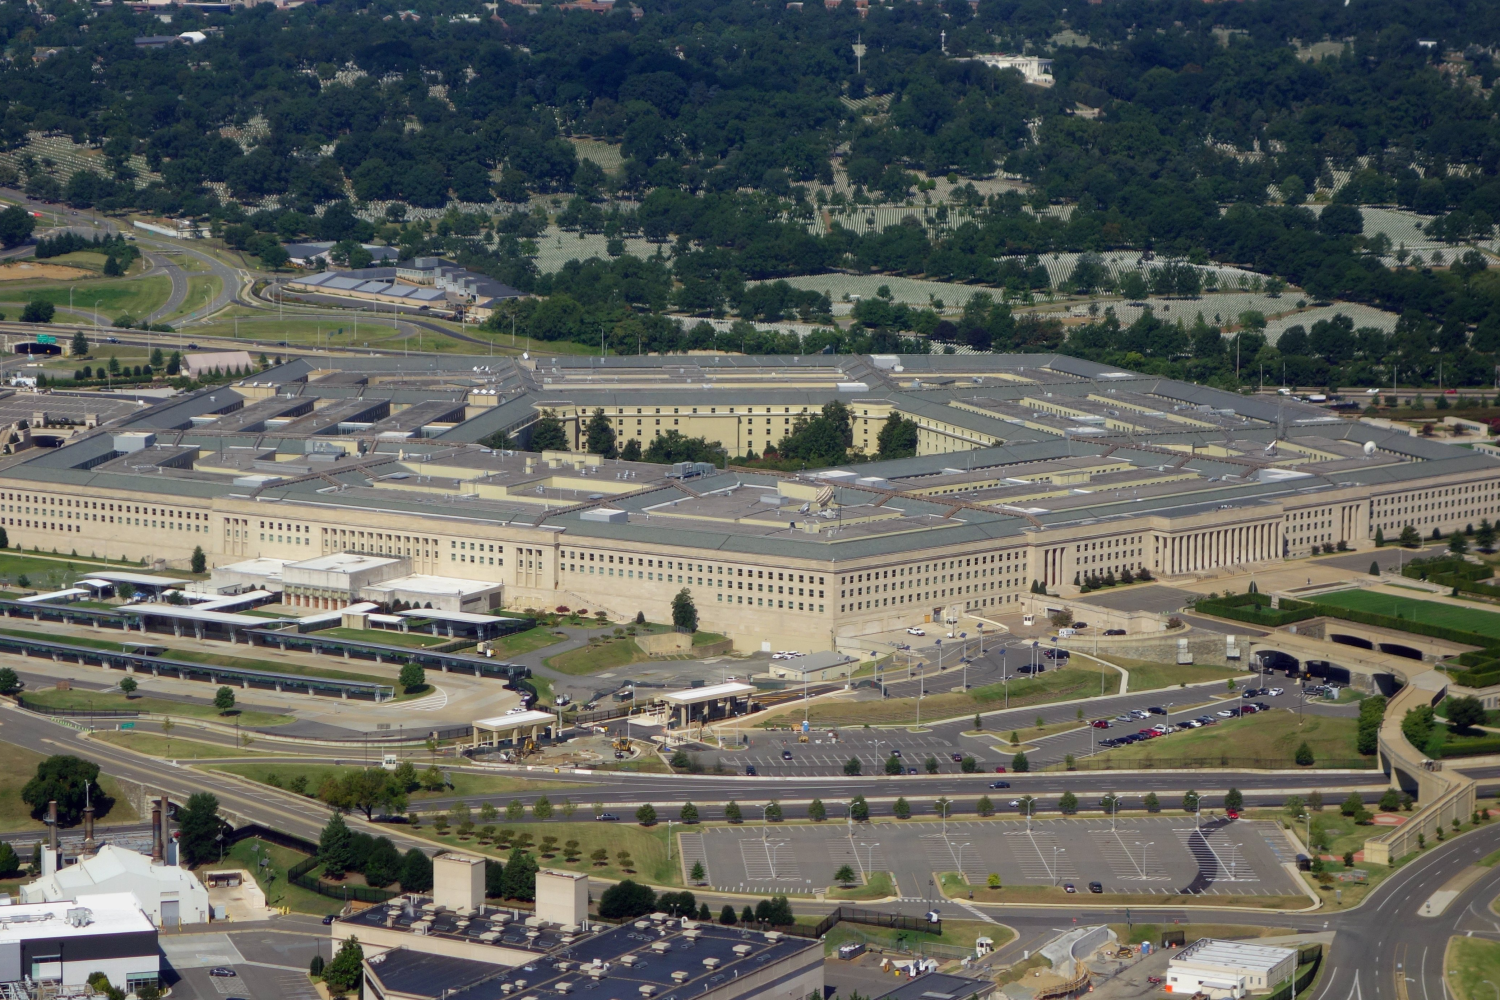 The Pentagon is seen from the air over Washington, D.C., on Aug. 25, 2013.